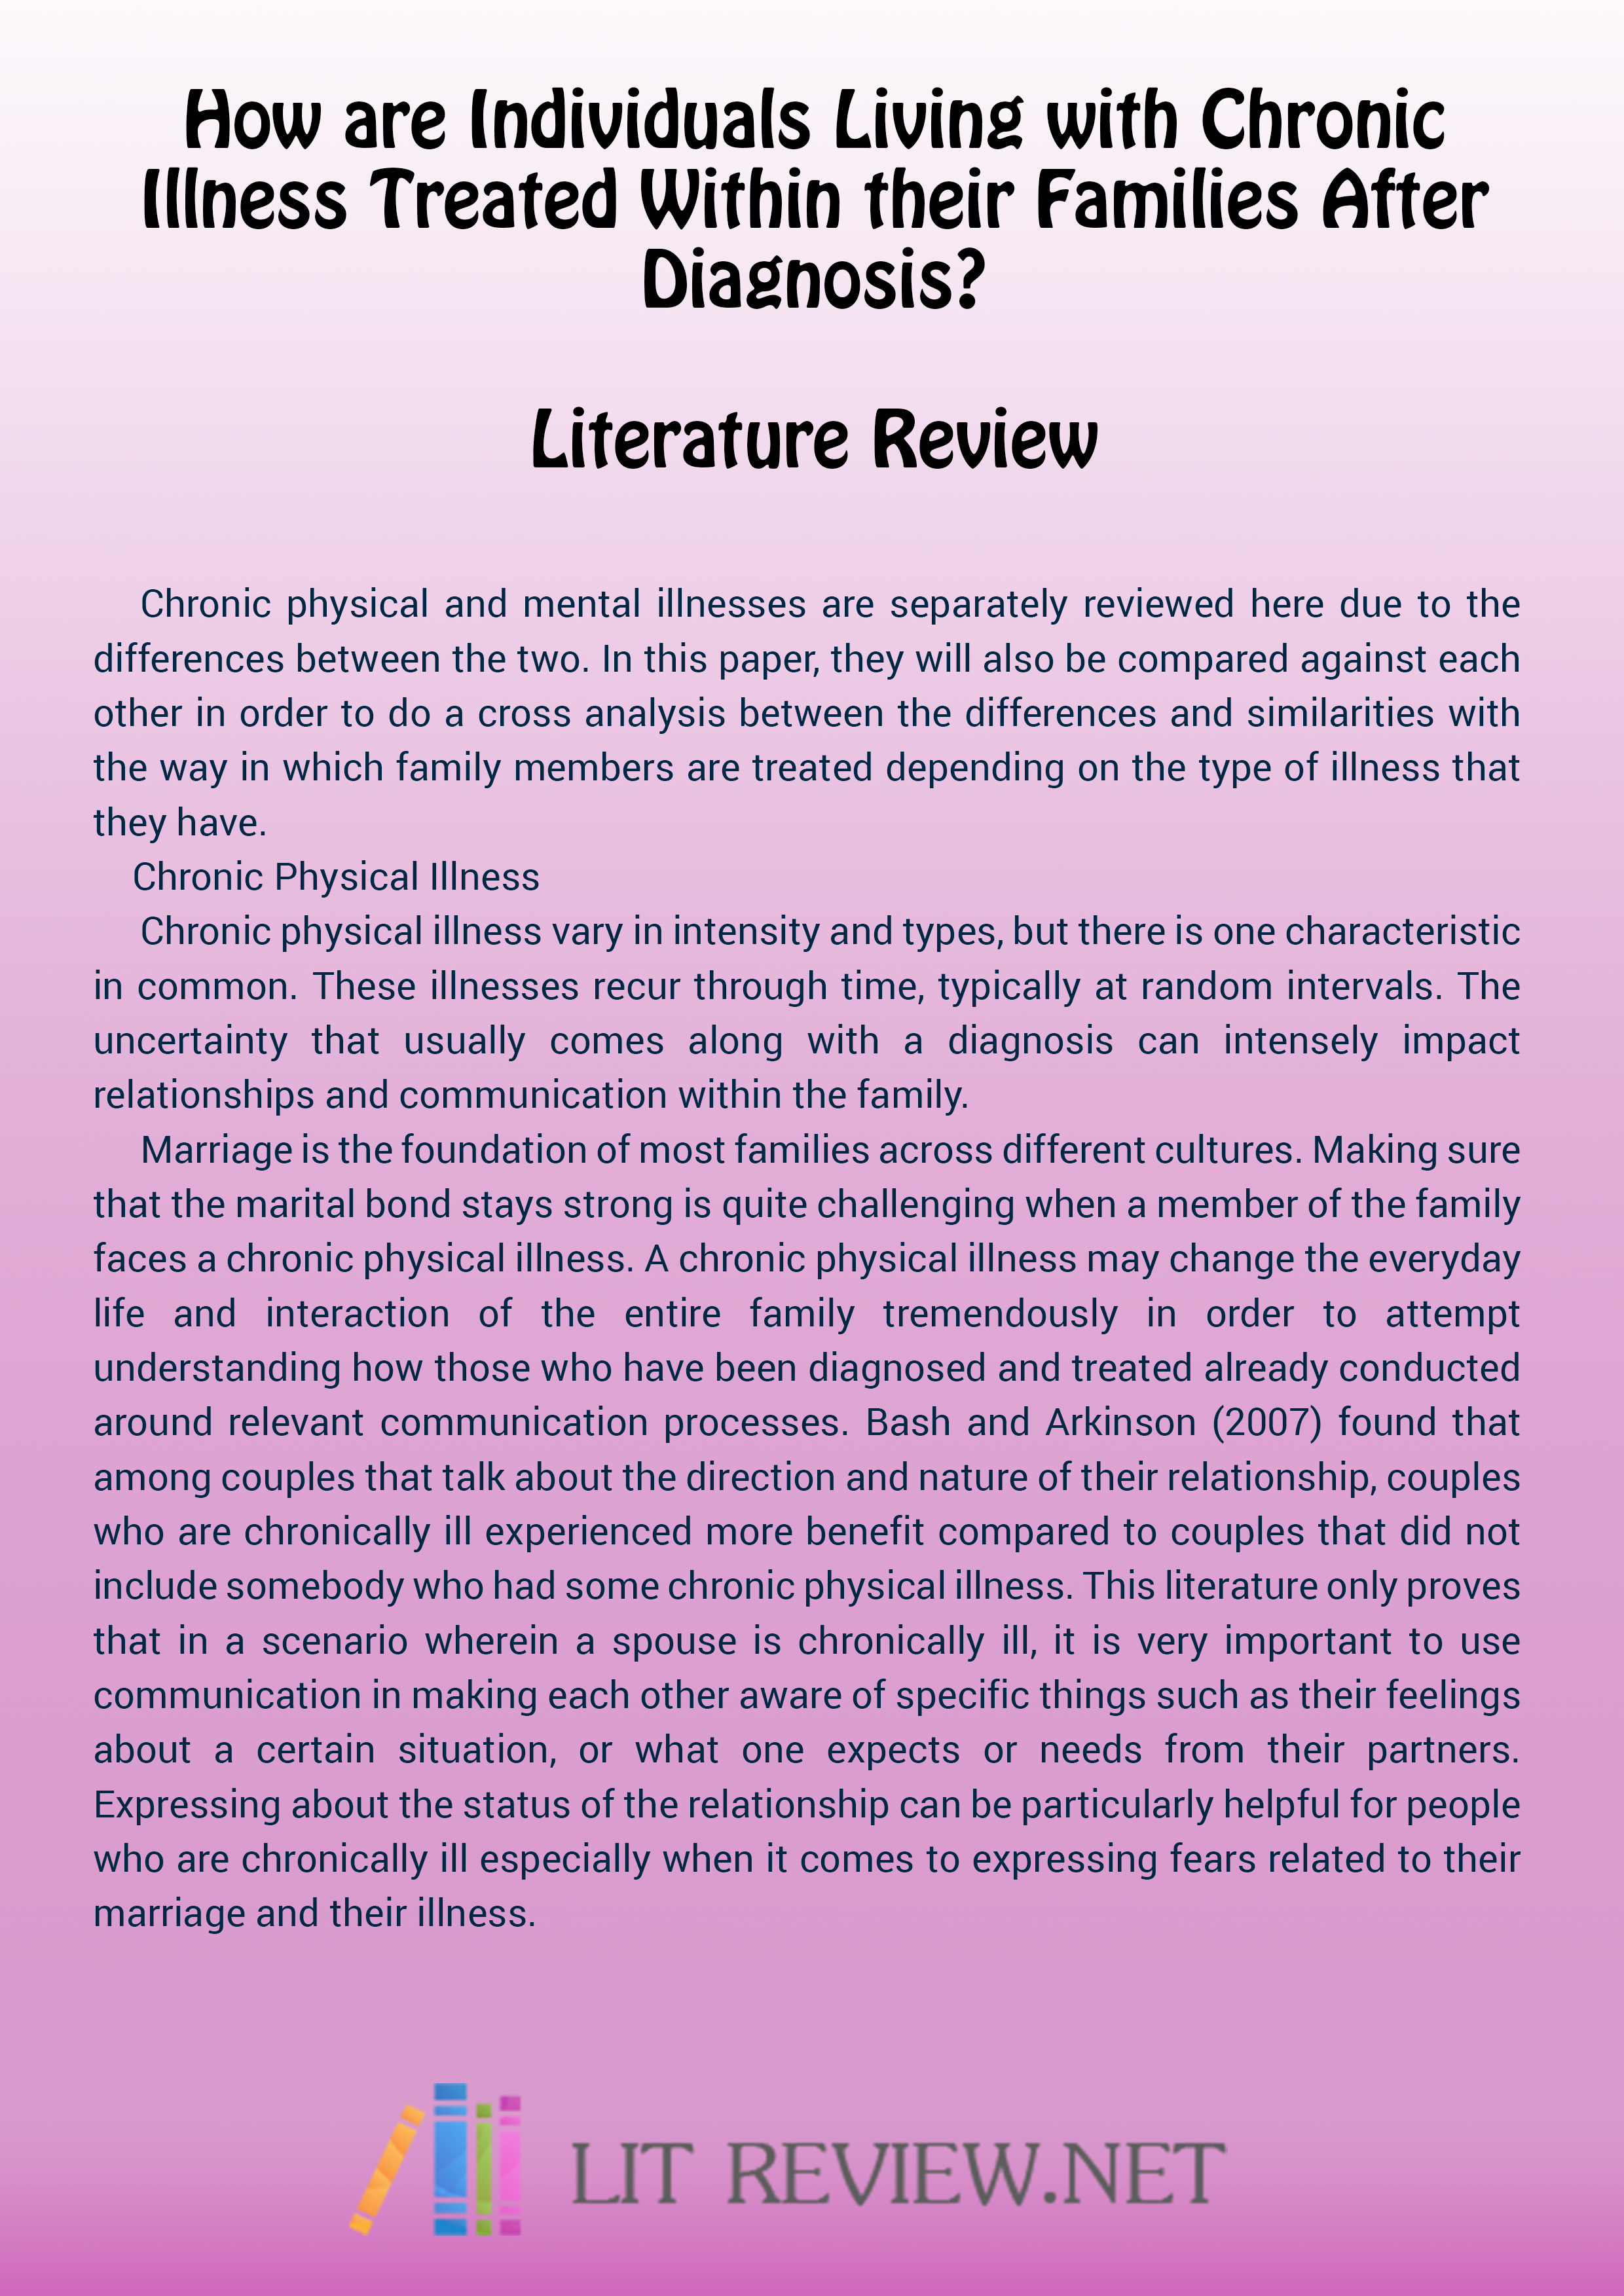 Literature review paper help